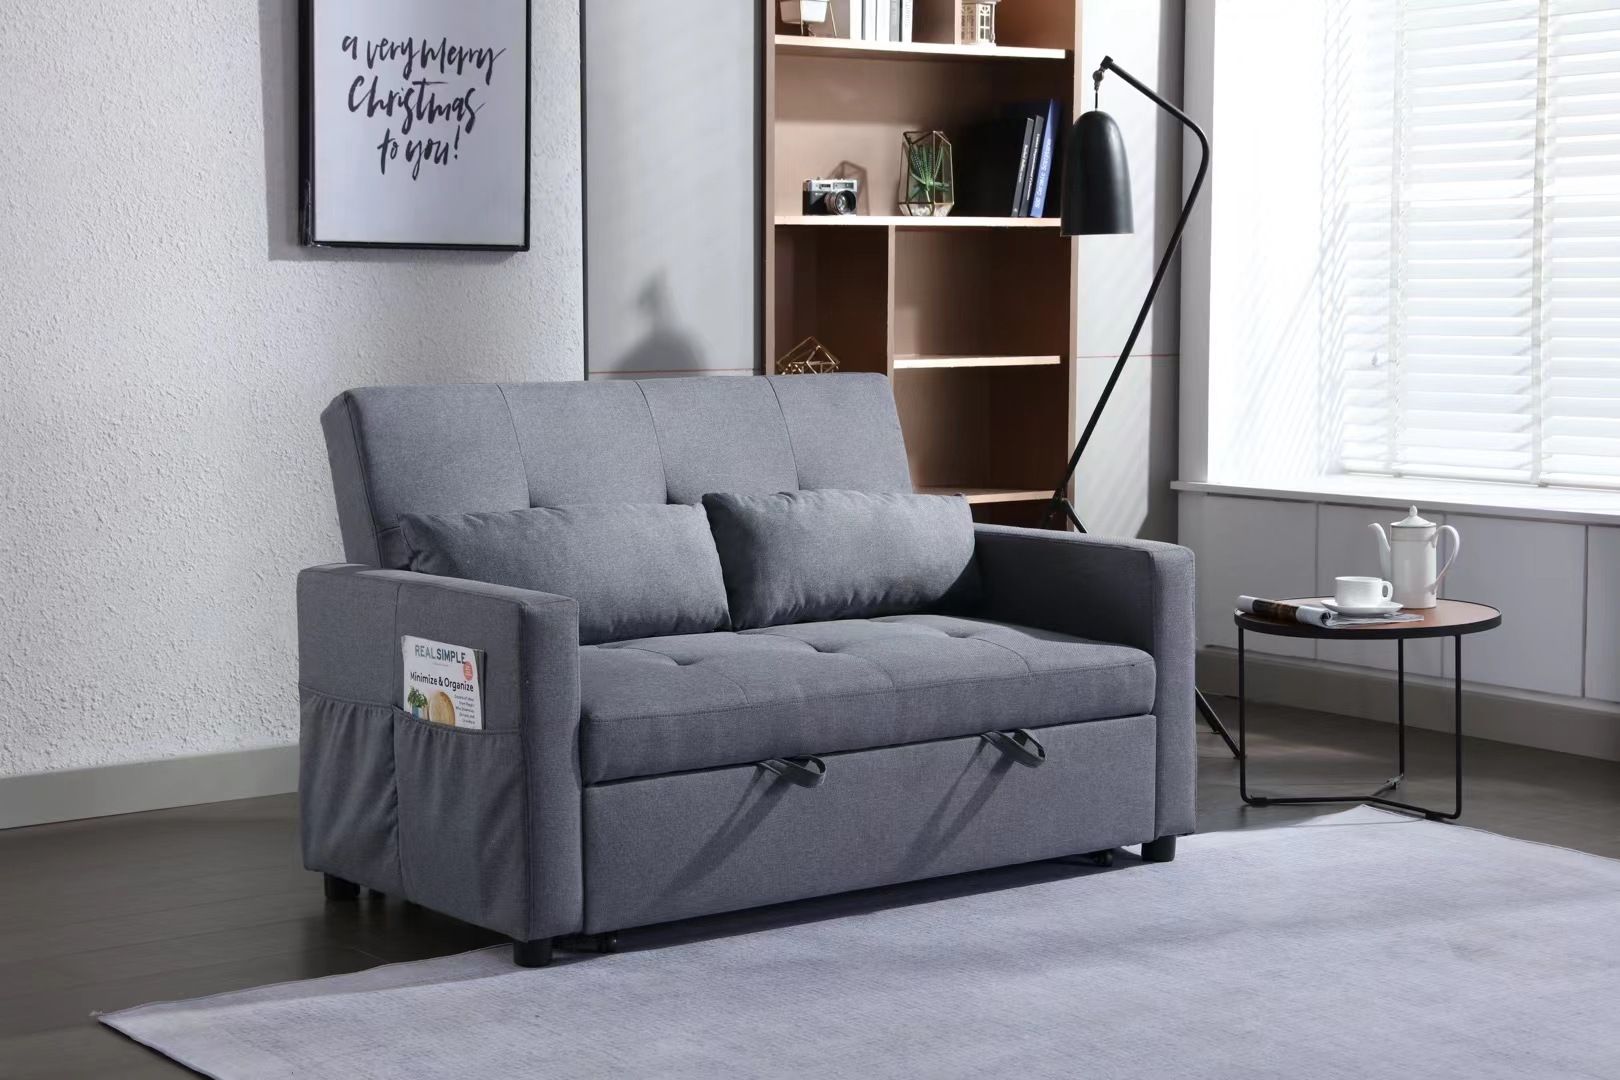 2 Seaters Slepper Sofa Bed.Dark Grey Linen Fabric 3-In-1 Convertible Sleeper Loveseat With Side Pocket.